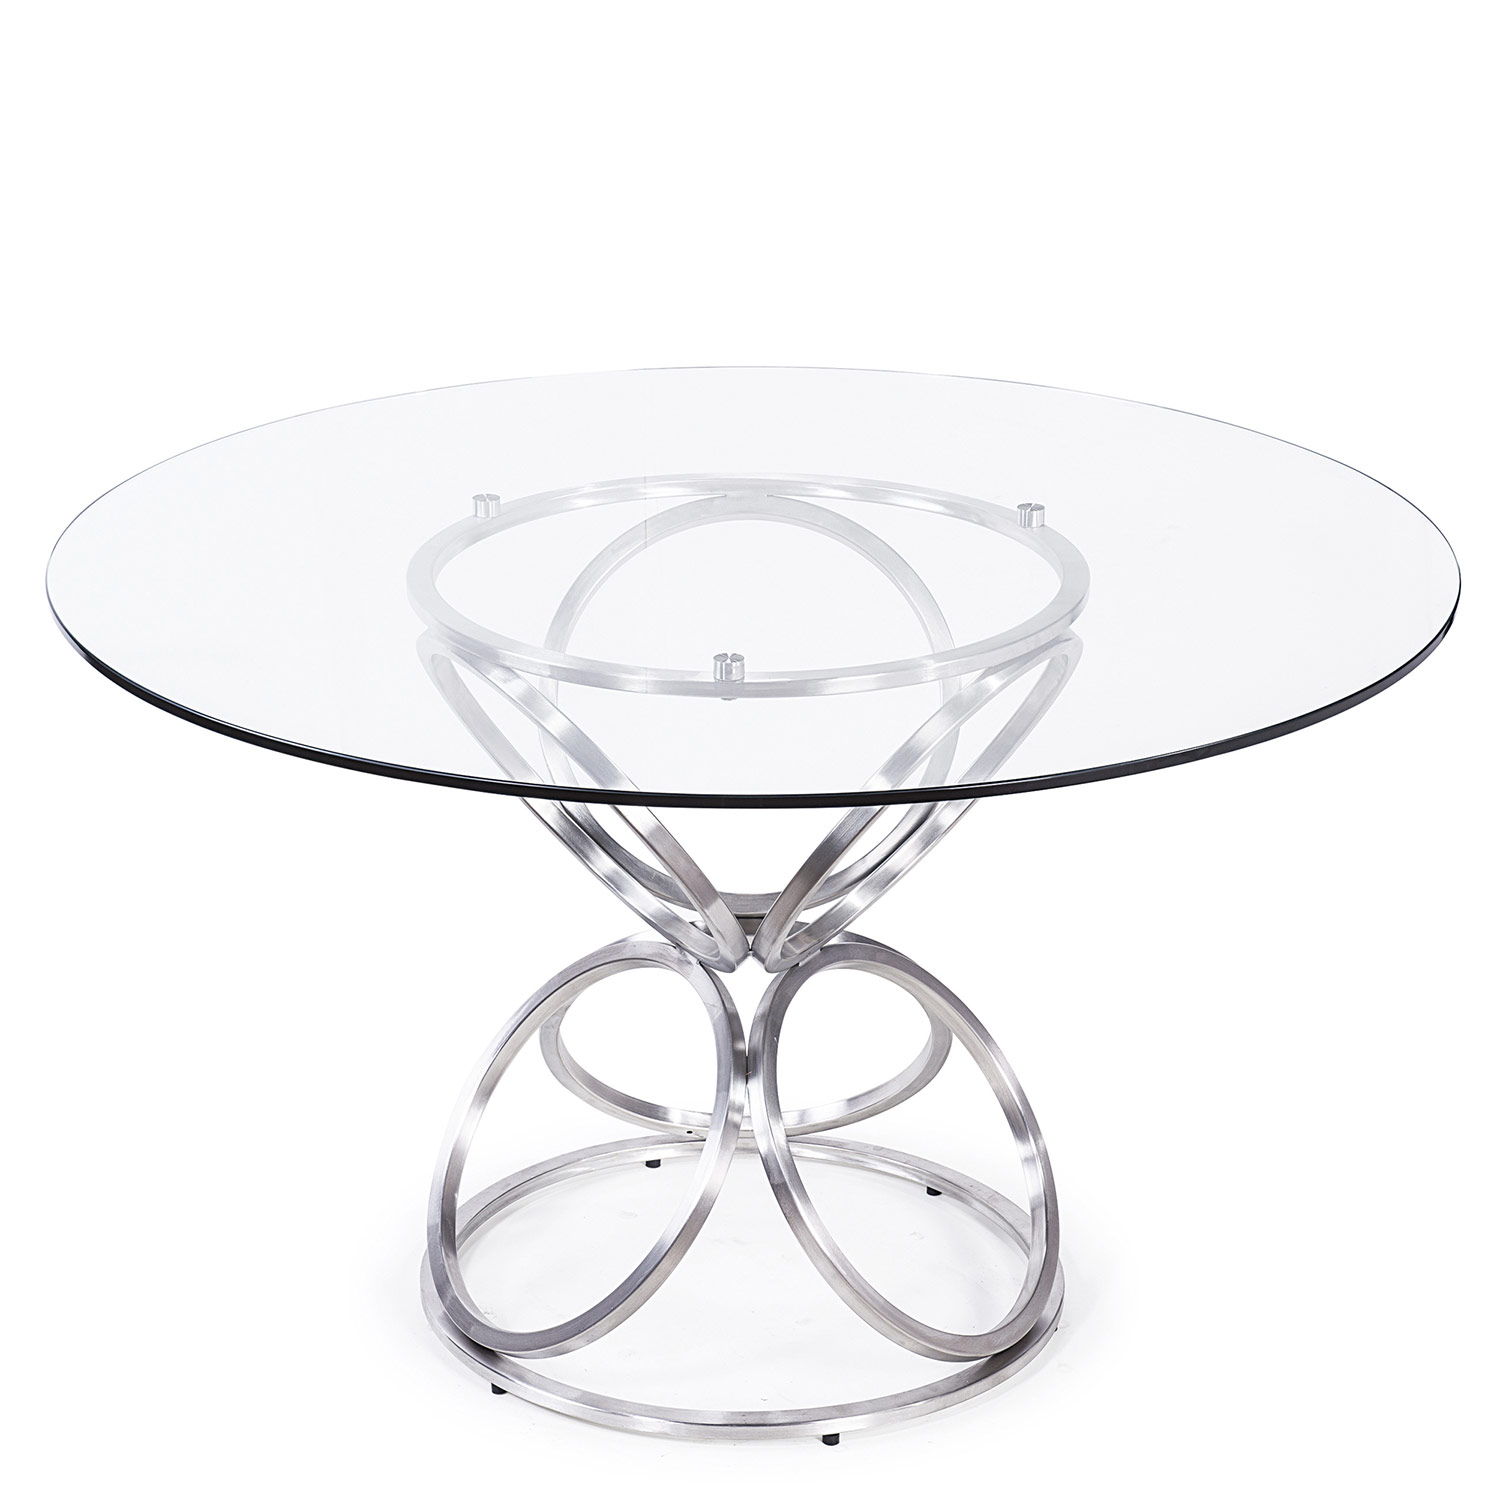 Armen Living Brooke 48-inch Round Dining Table - Grey